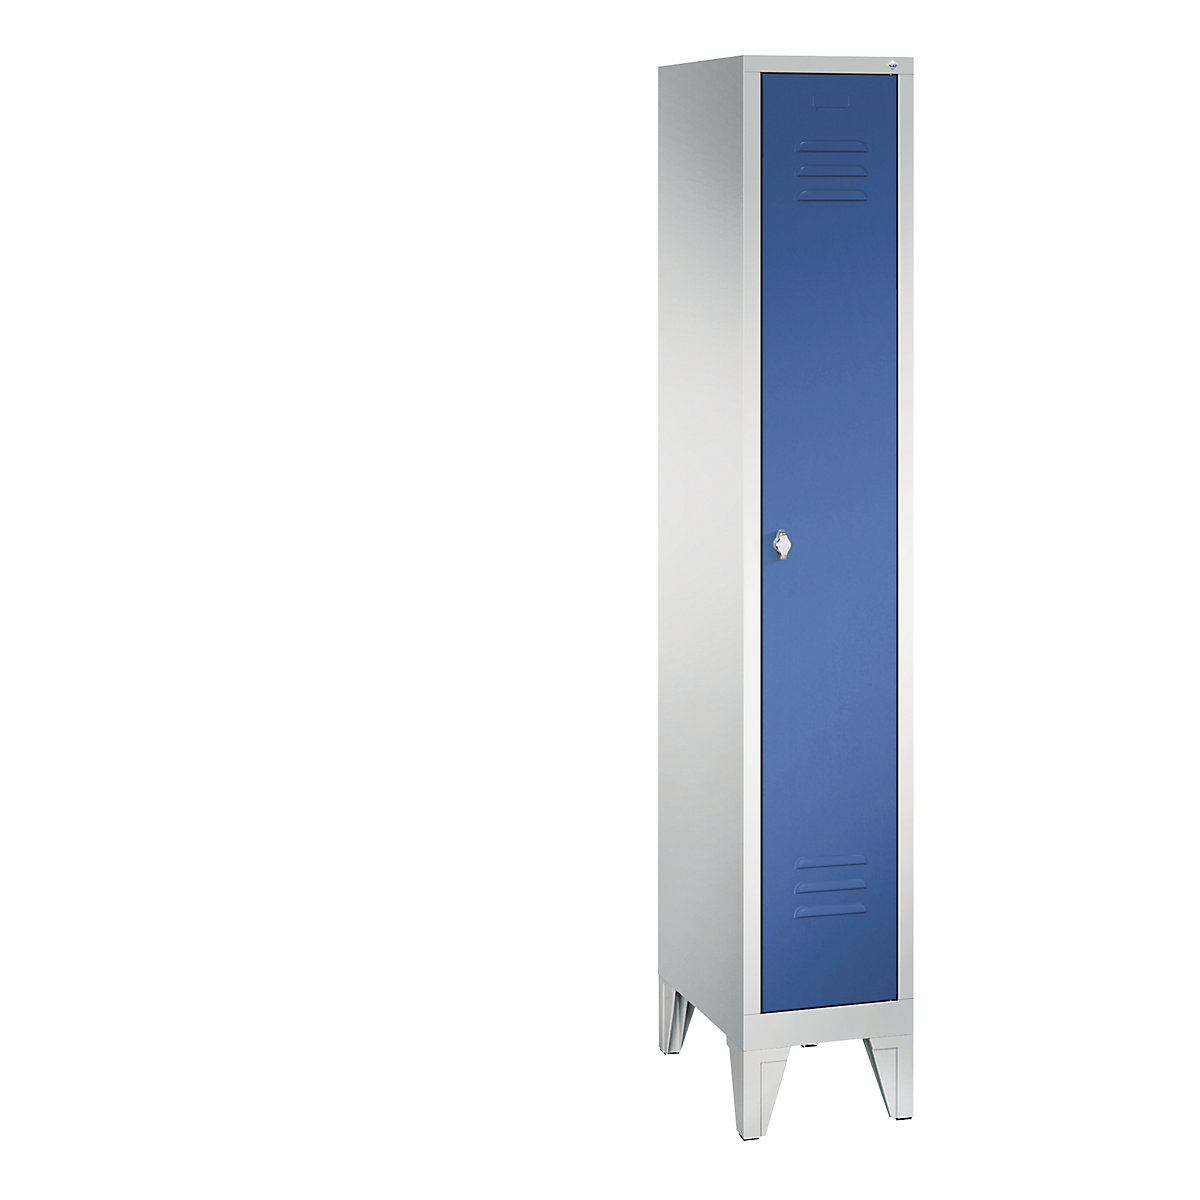 CLASSIC cloakroom locker with feet – C+P, 1 compartment, compartment width 300 mm, light grey / gentian blue-8